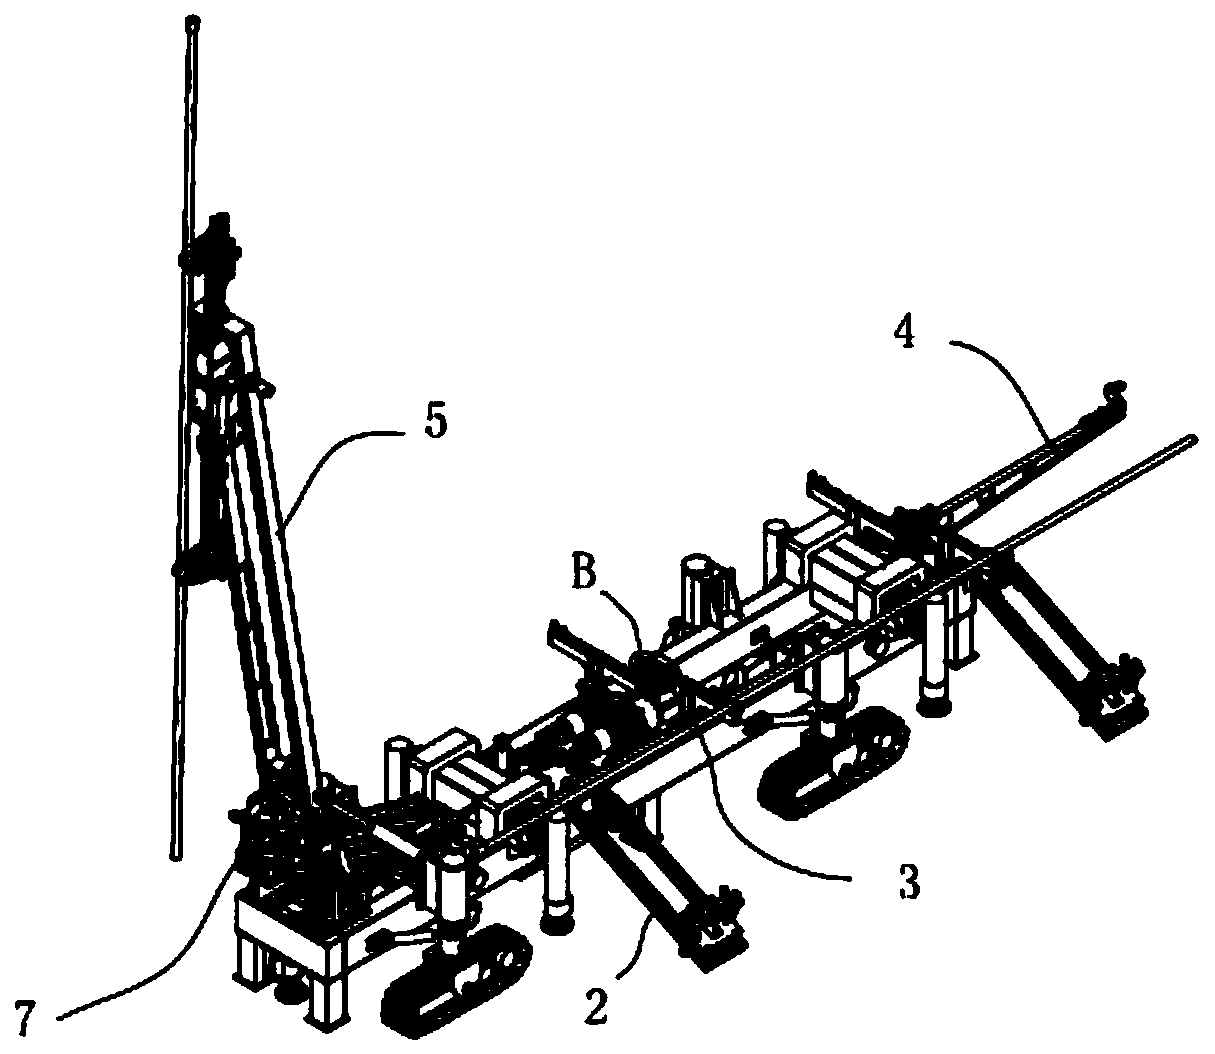 Petroleum well repairing automation device